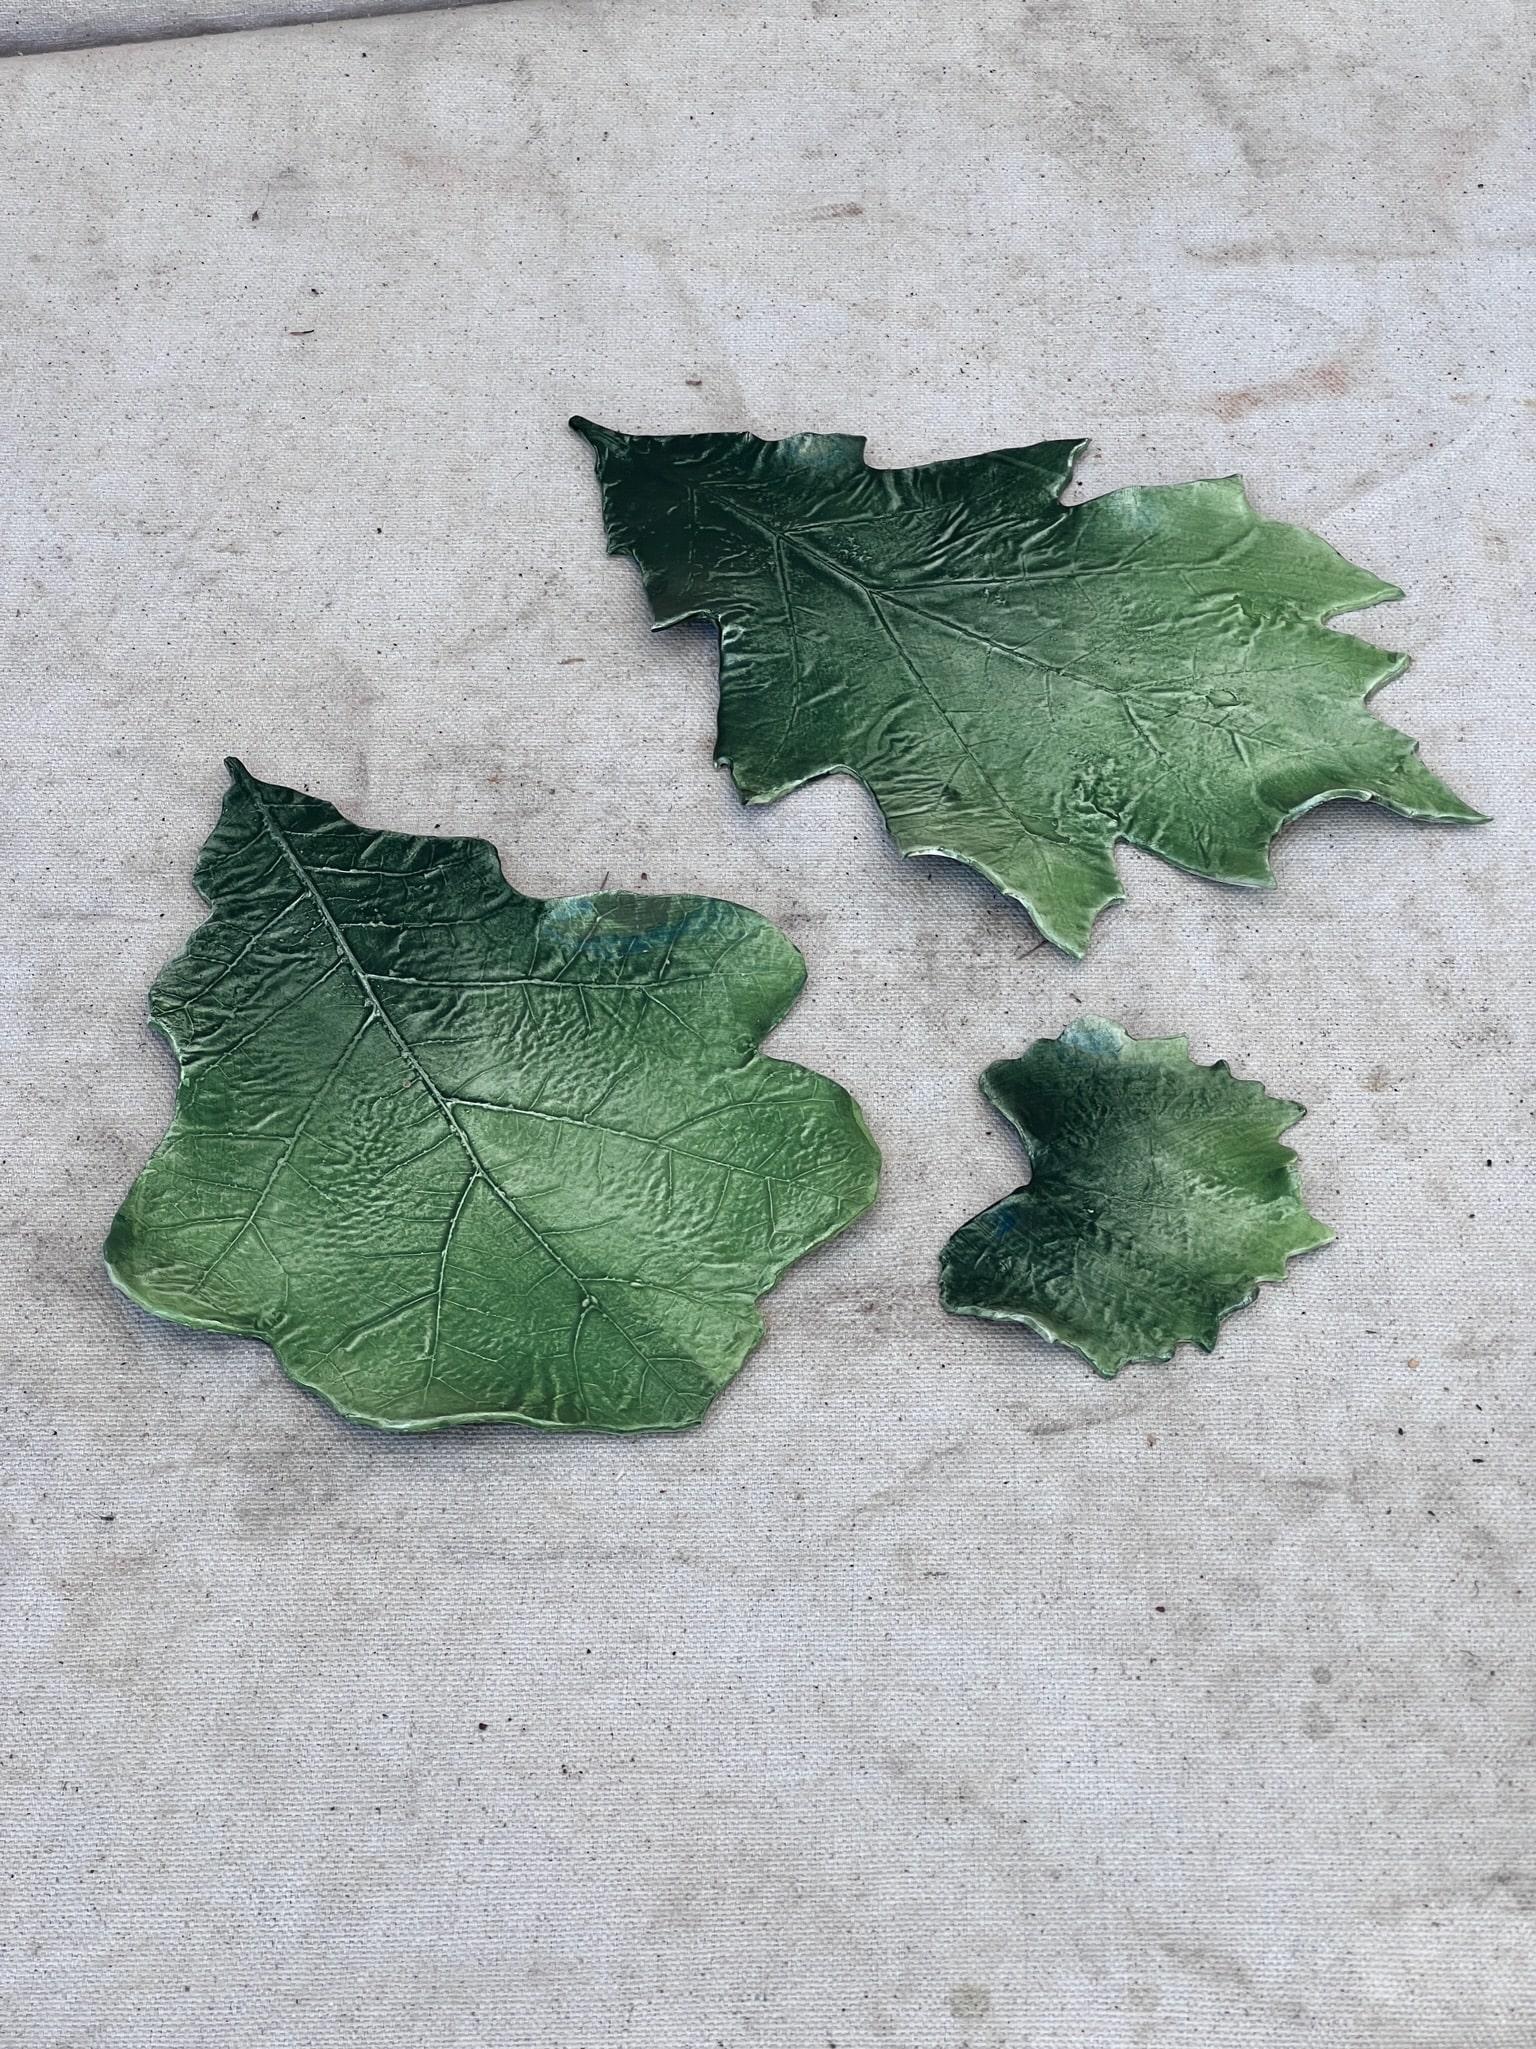 Early 21st Century Vietri Hand-Crafted Italian Porcelain Leaf Set- 3 Pieces For Sale 3